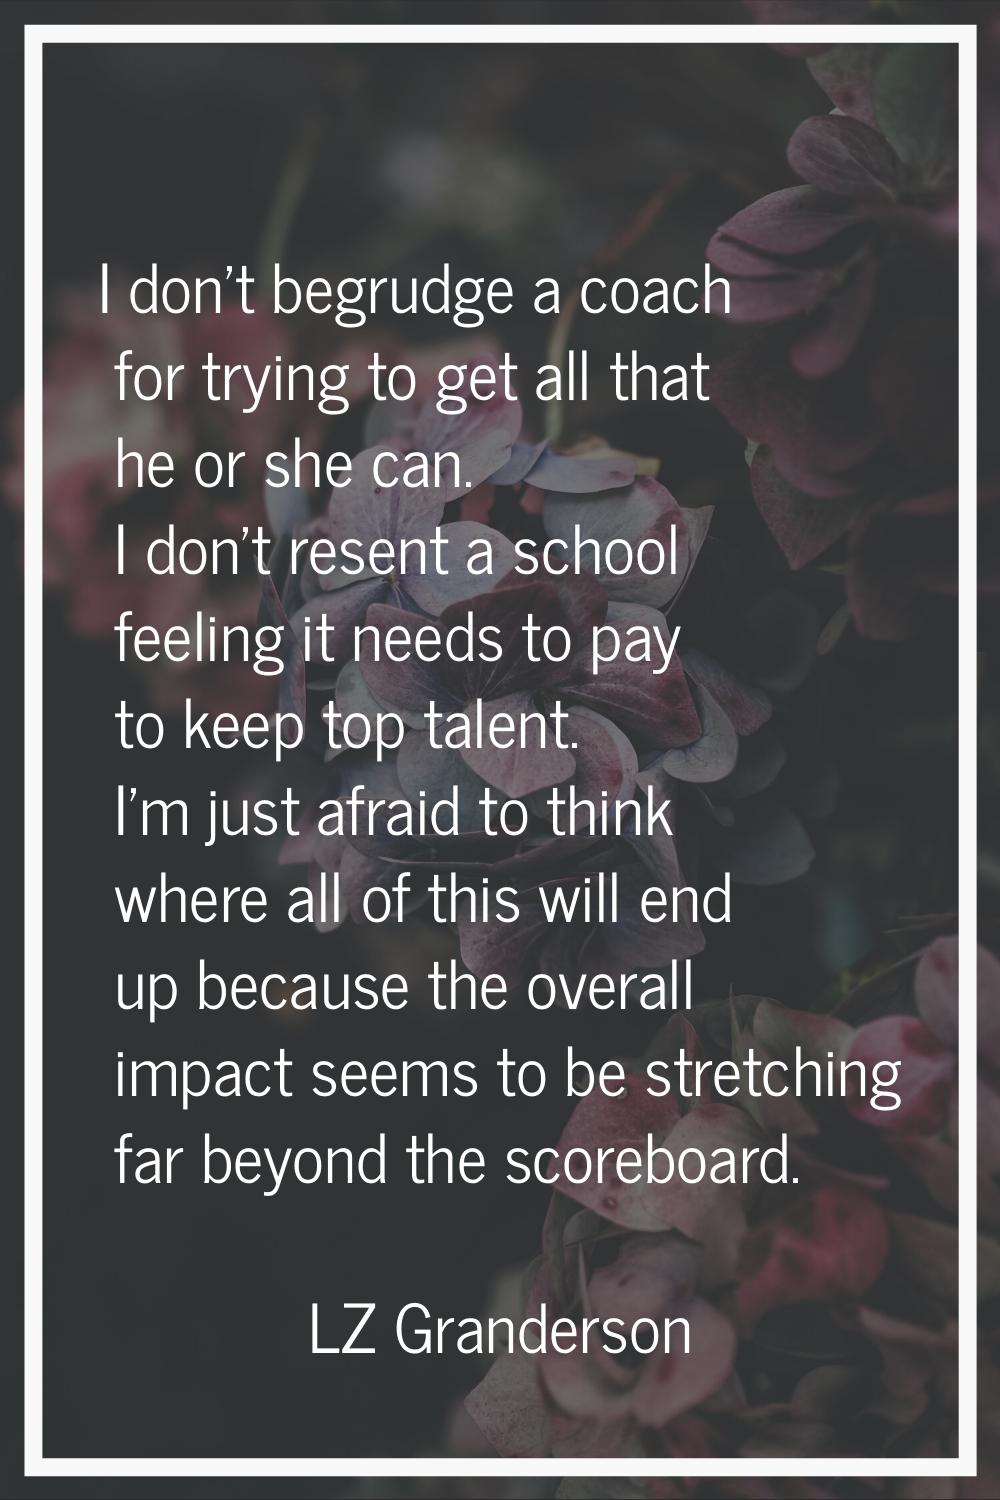 I don't begrudge a coach for trying to get all that he or she can. I don't resent a school feeling 